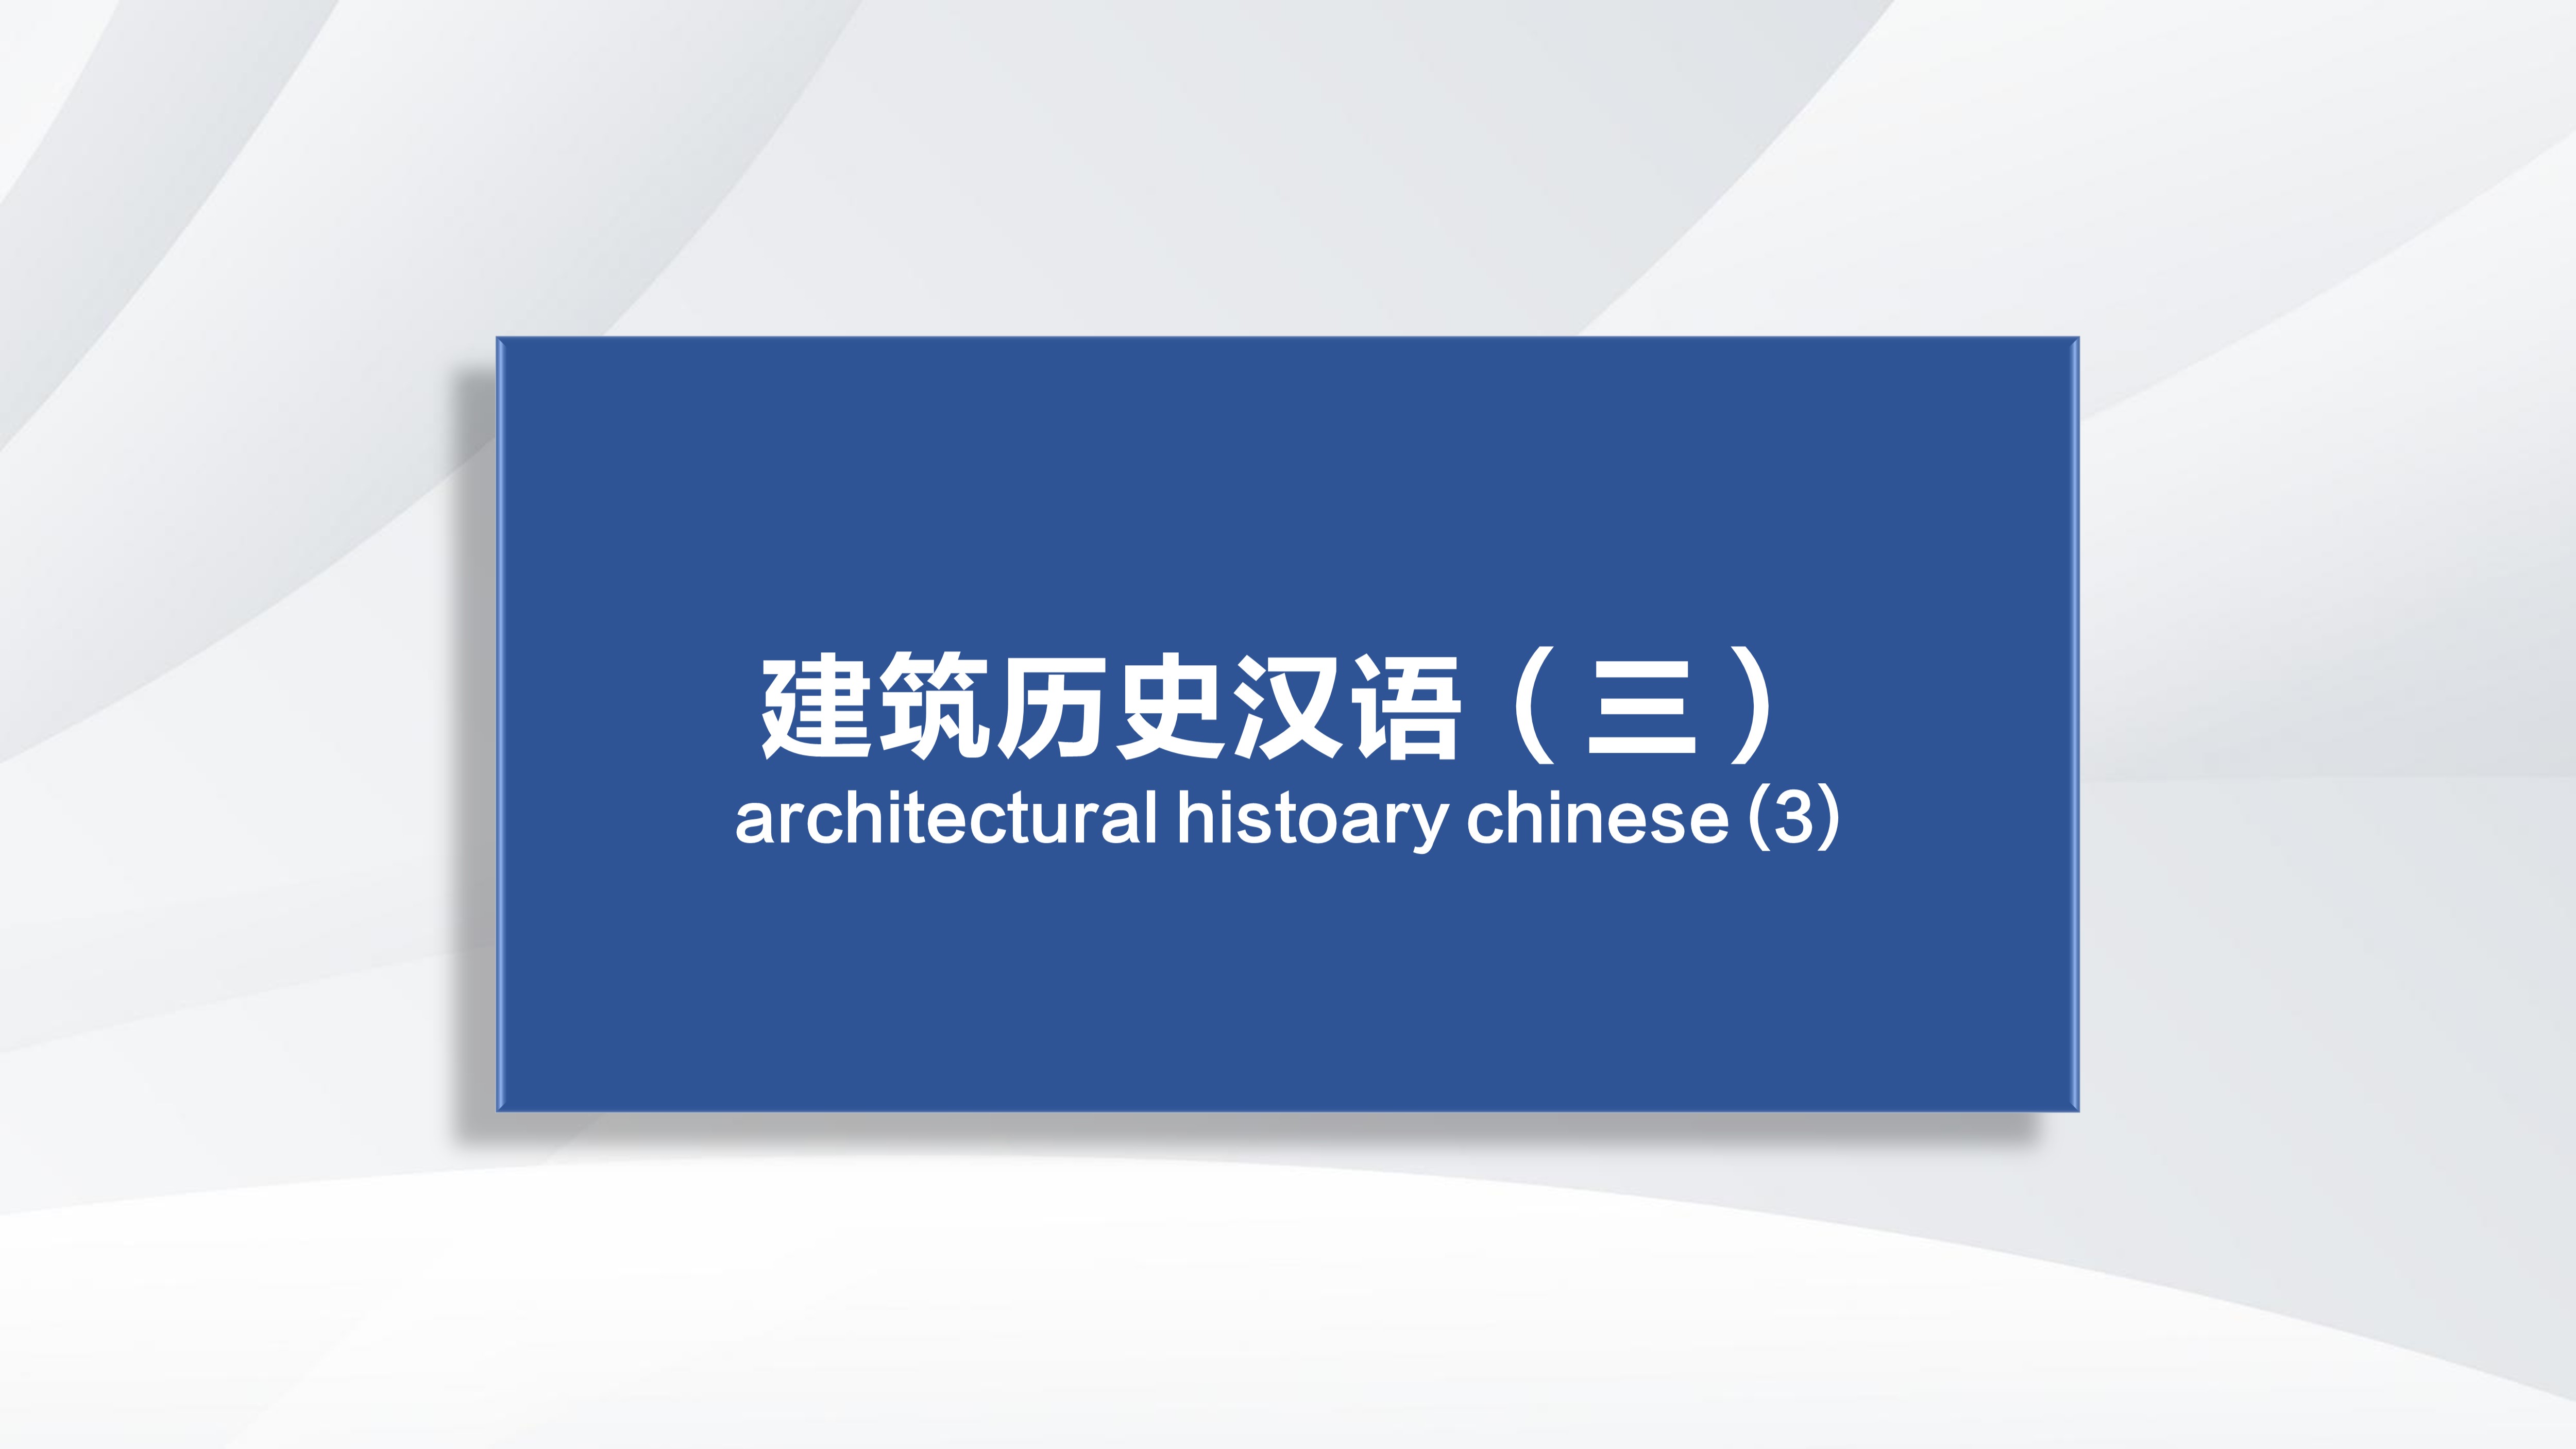 Architectural History Chinese (3)